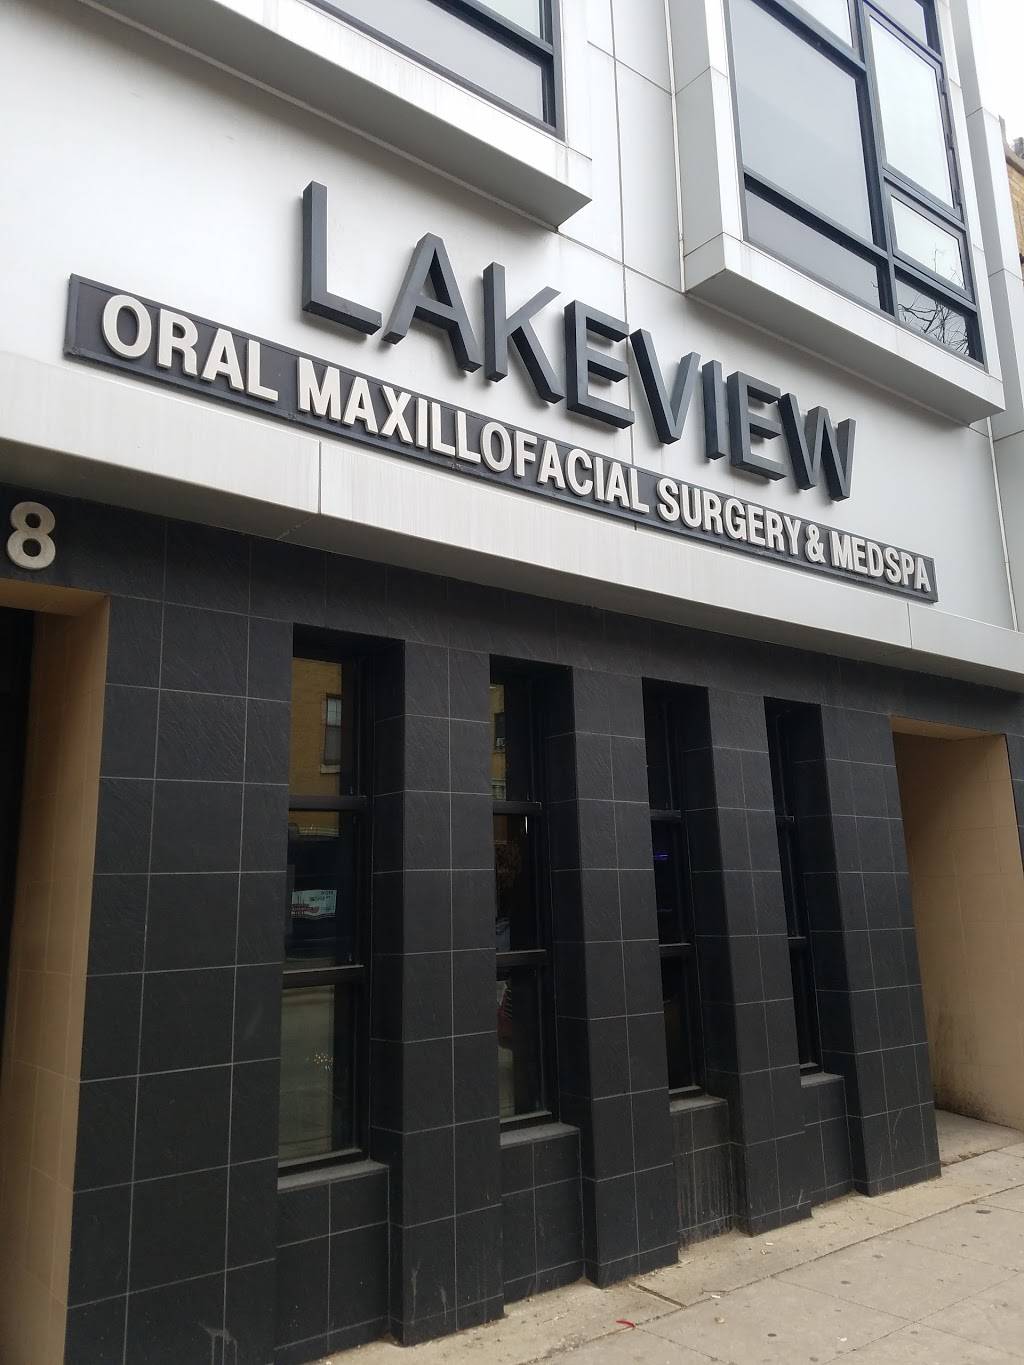 Oral Maxillofacial Surgery + Med Spa | 1628 W Belmont Ave, Chicago, IL 60657 | Phone: (773) 327-9500